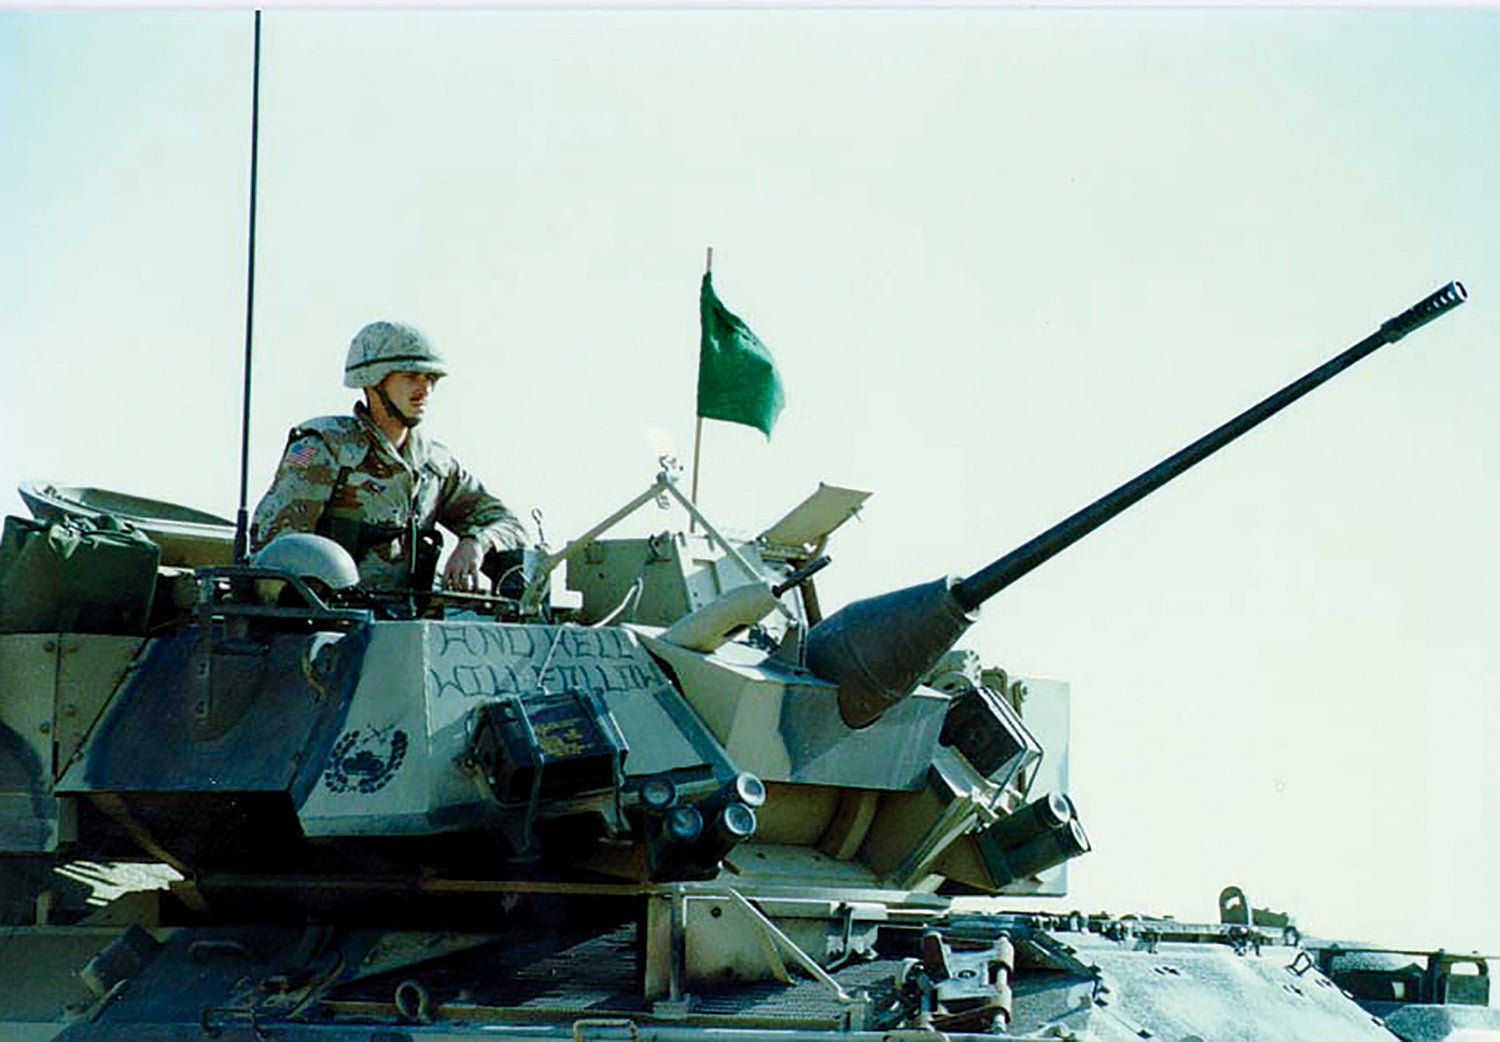 A soldier from the 2nd Squadron, 4th Cavalry Regiment, 24th Infantry Division, maneuvers his Bradley Fighting Vehicle during a live-fire exercise in 1990. (Credit: U.S. Army/SGT. Randall Yackiel)